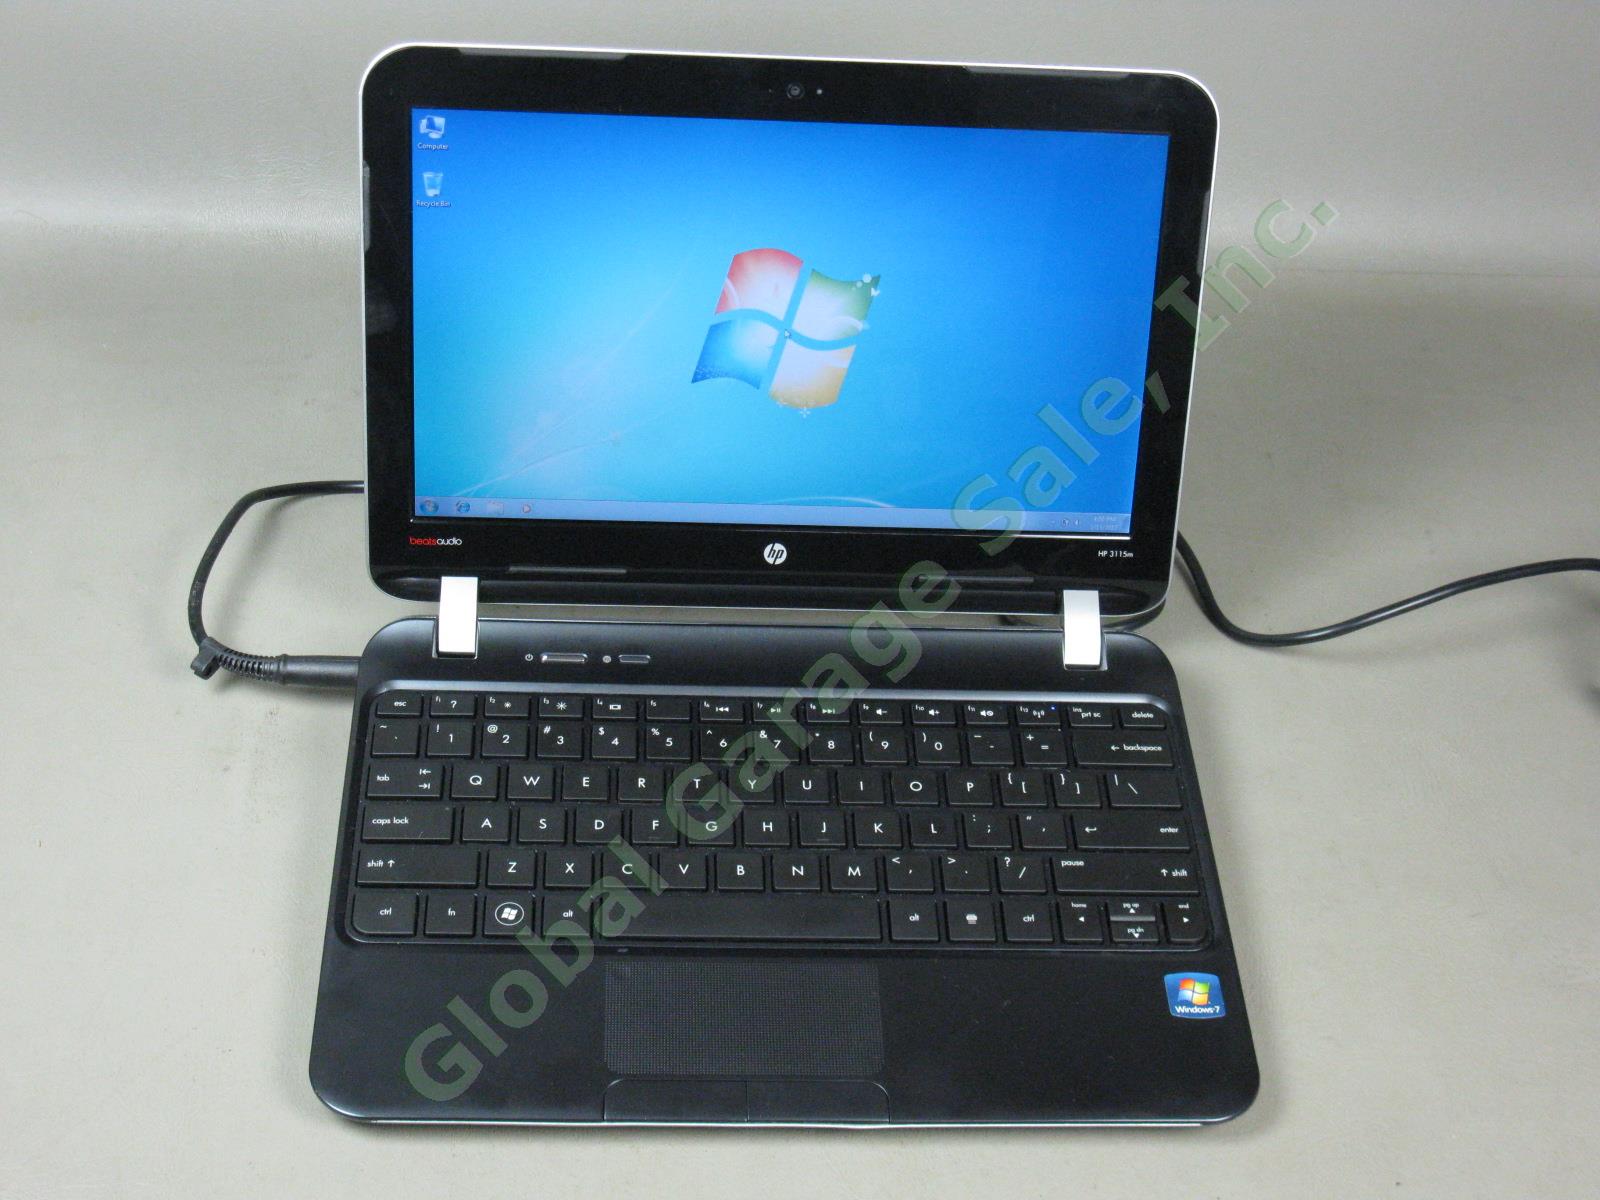 HP 3115m 11.6" Notebook Laptop Computer 1.65GHz 4GB 320GB Windows 7 Ultimate NR!